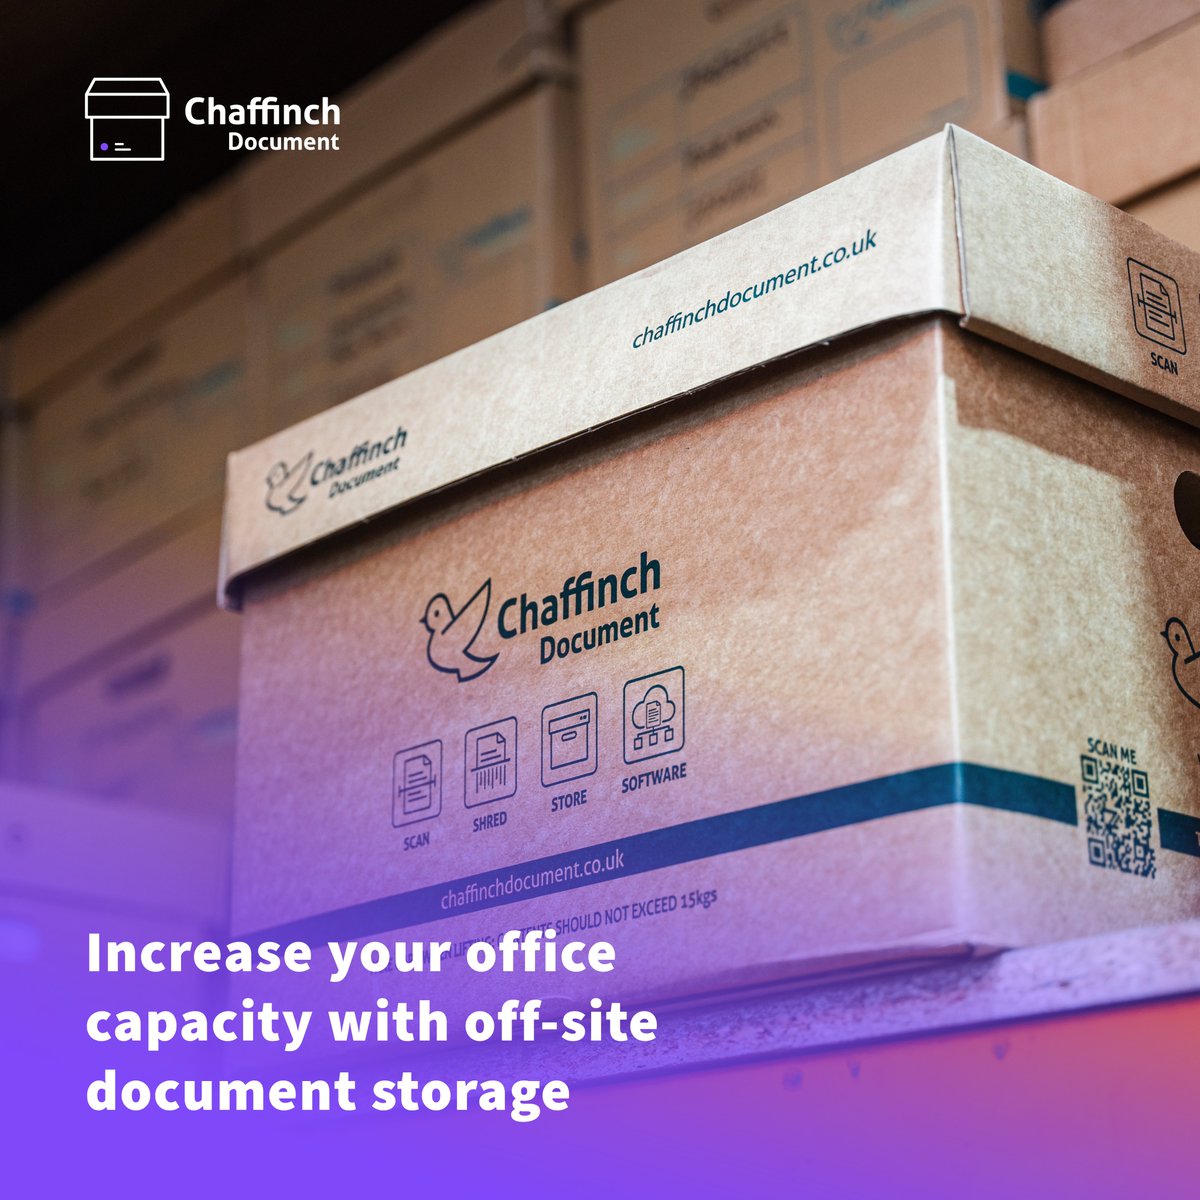 Want to increase your #officecapacity?

Off-site document storage can be 60% cheaper than investing in a new office unit.

Our archive storage facility stores over 2m+ files across a wide range of industries.

#documentstorage